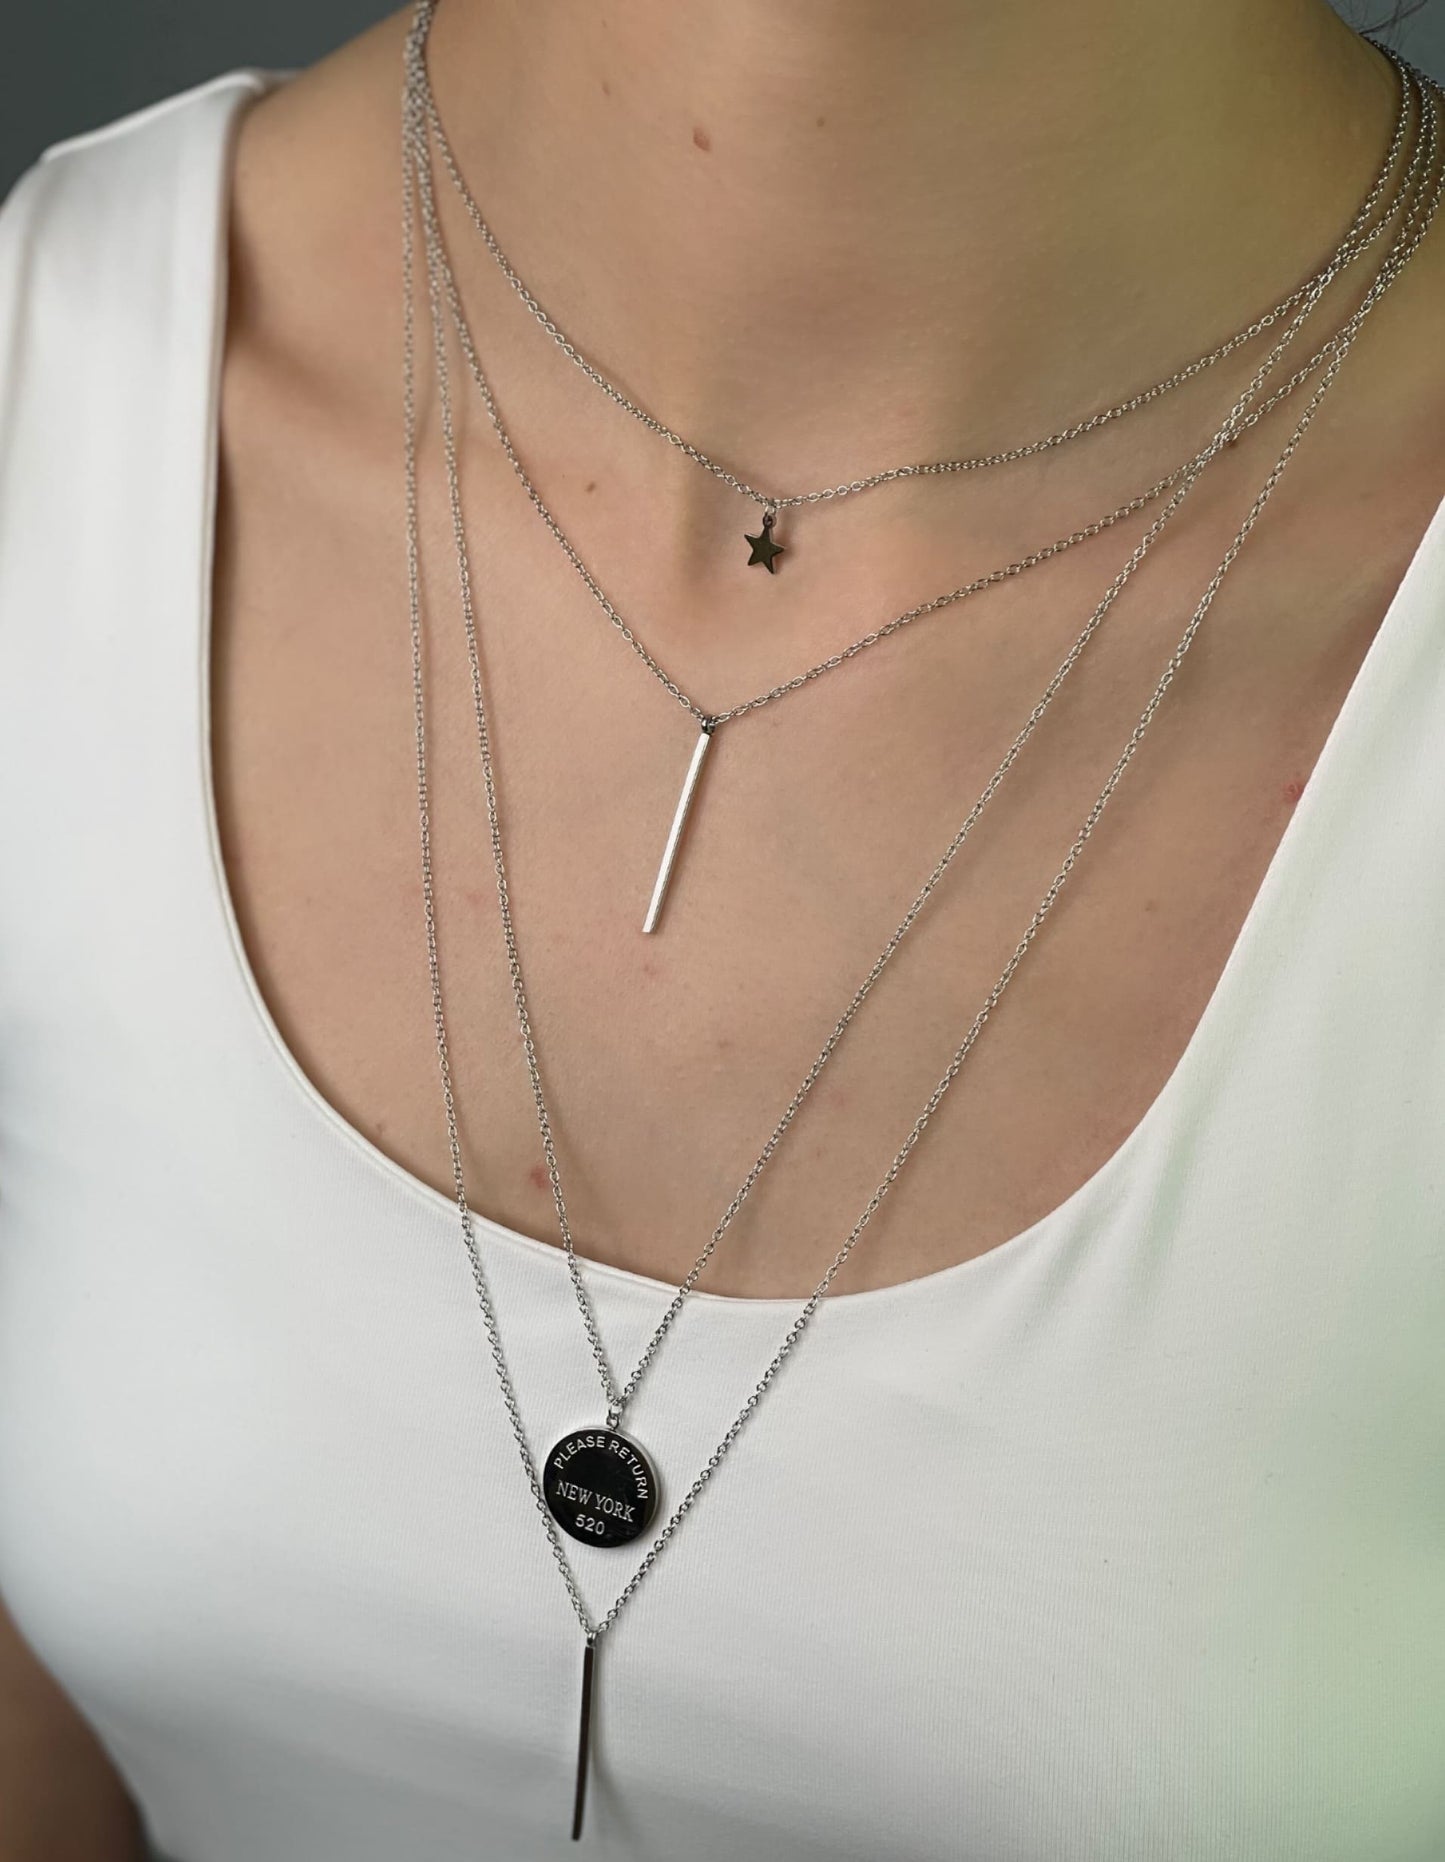 Stainless steel chain choker necklace with pendants